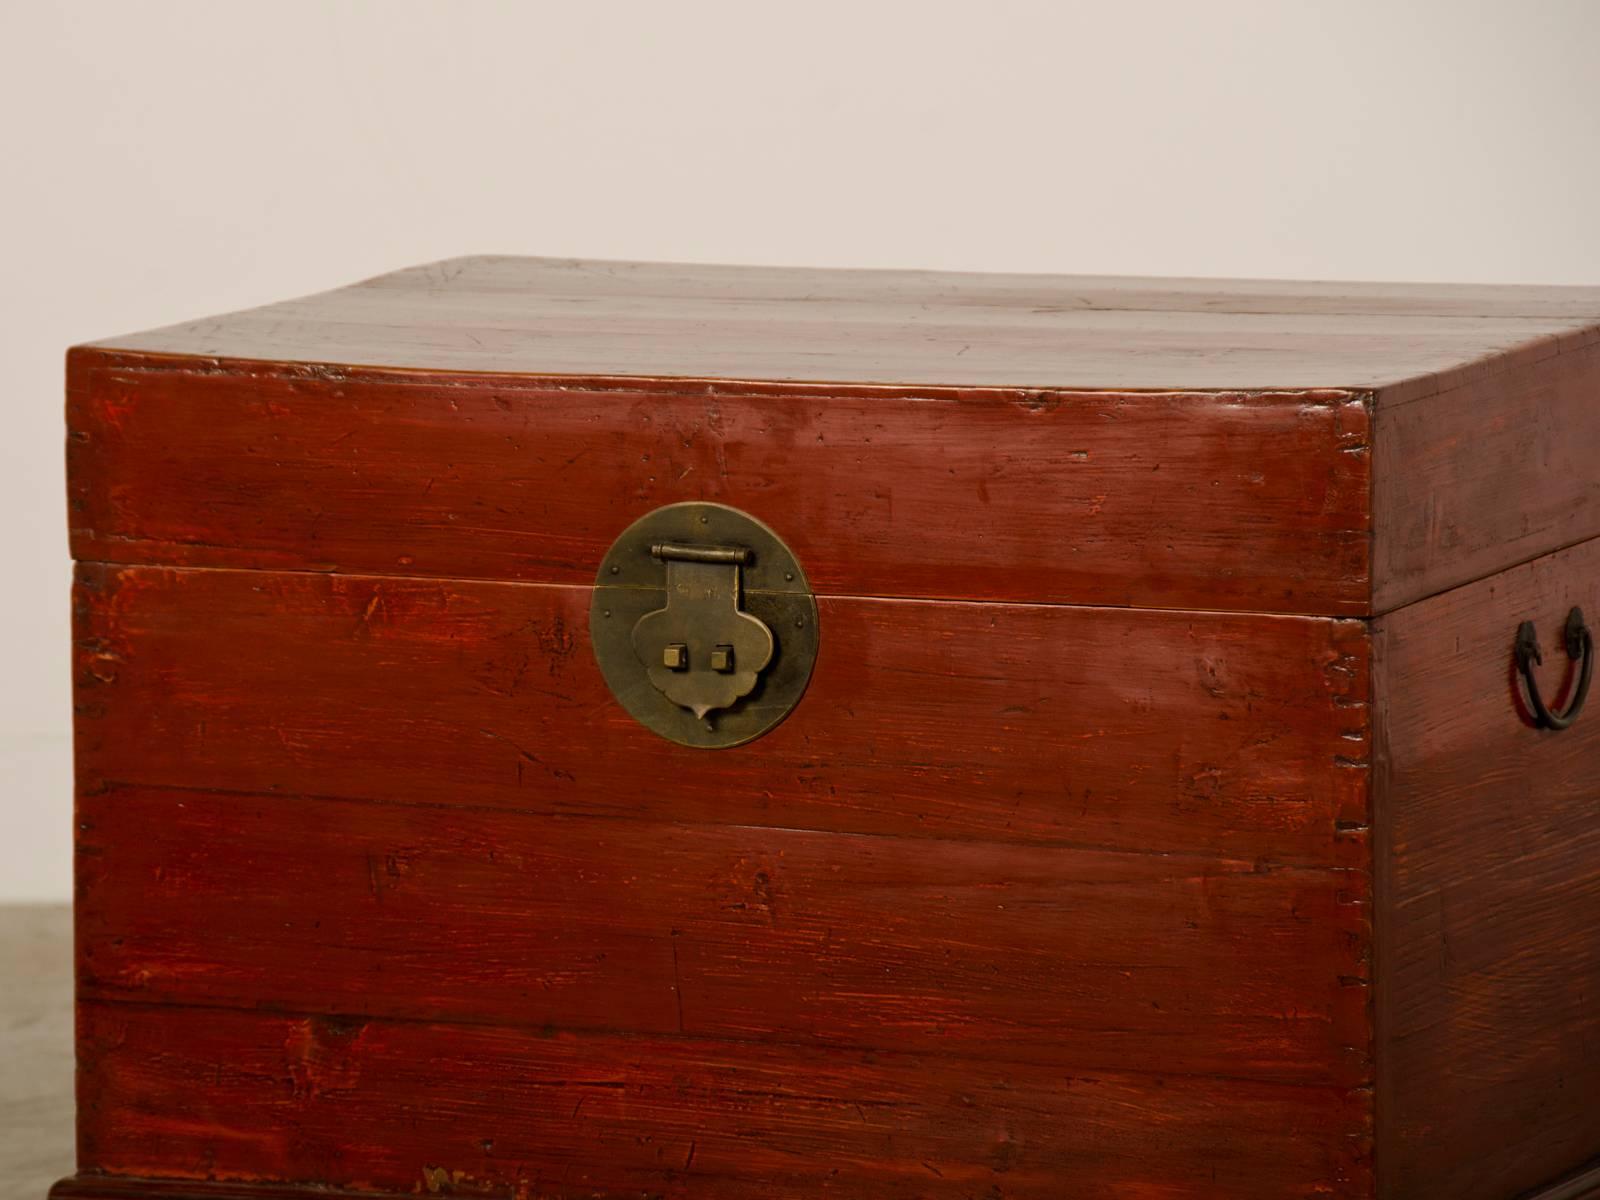 Metal Red Lacquer Antique Chinese Trunk Kuang Hsu Period China, circa 1875